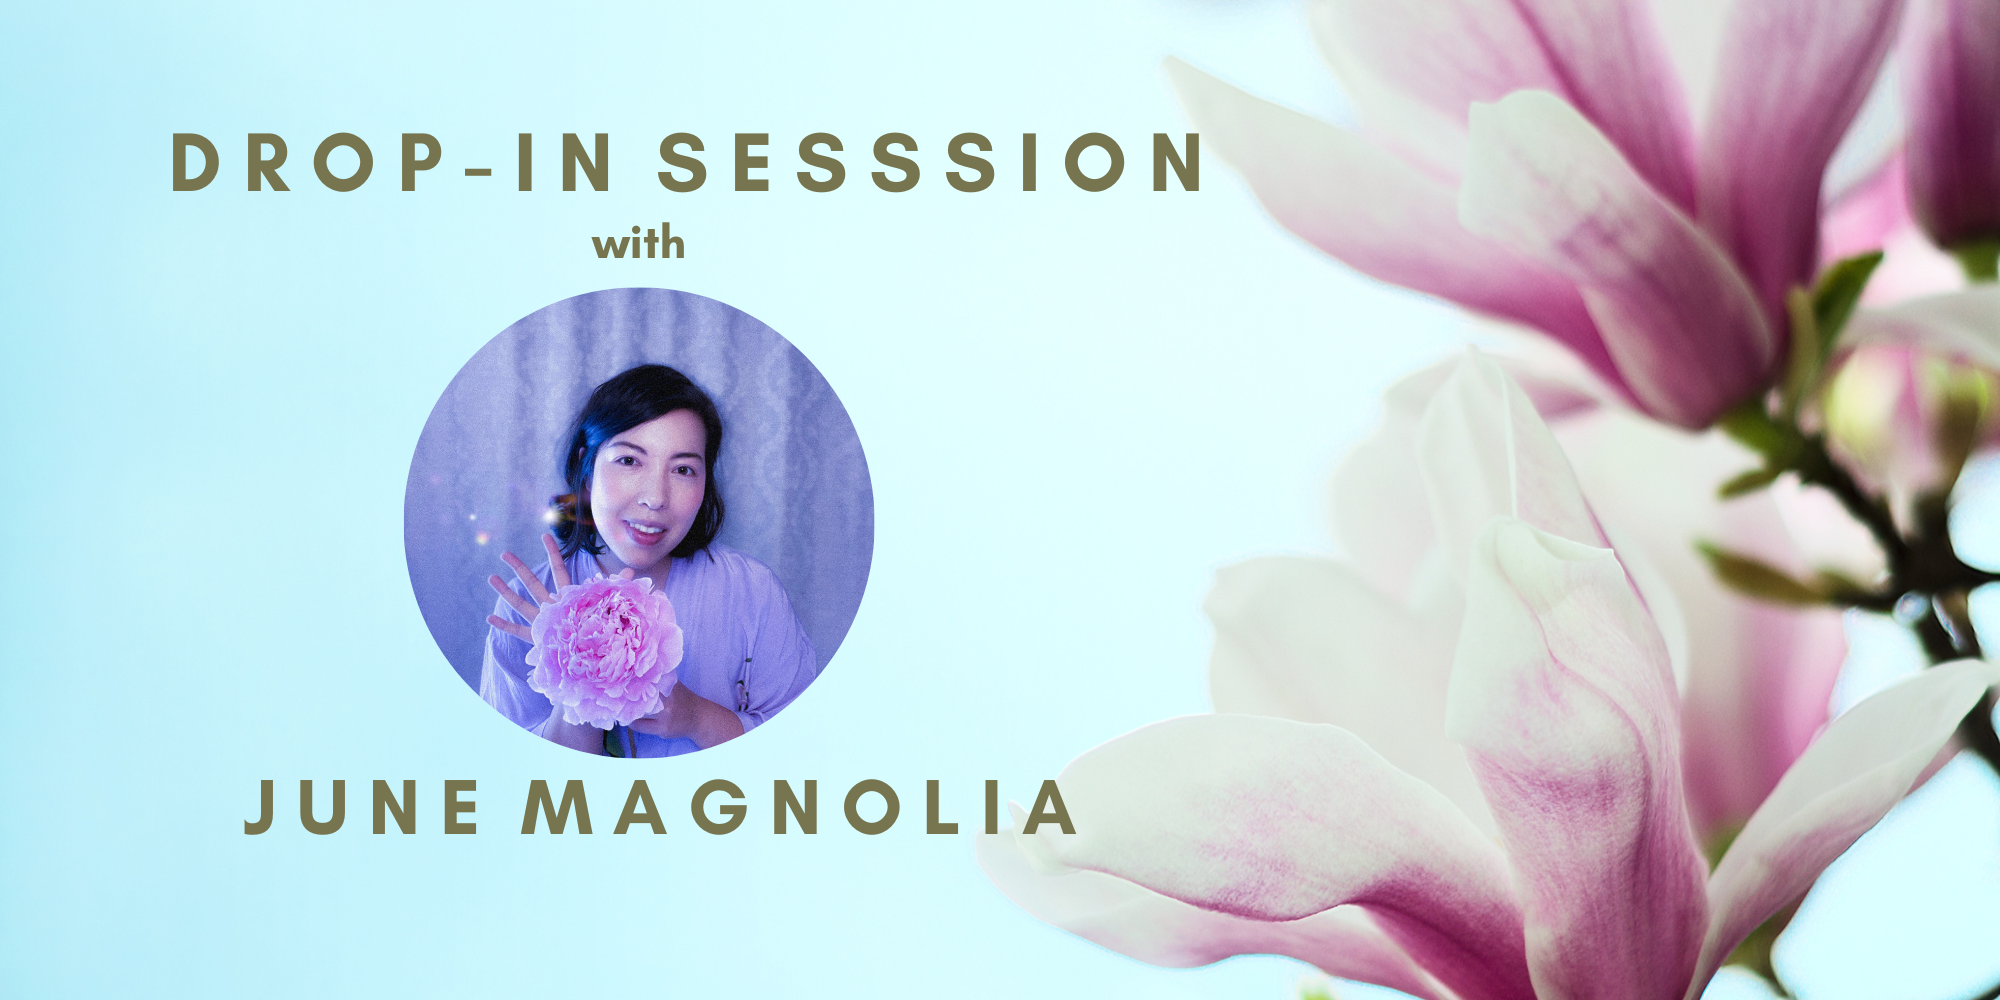 Drop-In Session with June Magnolia